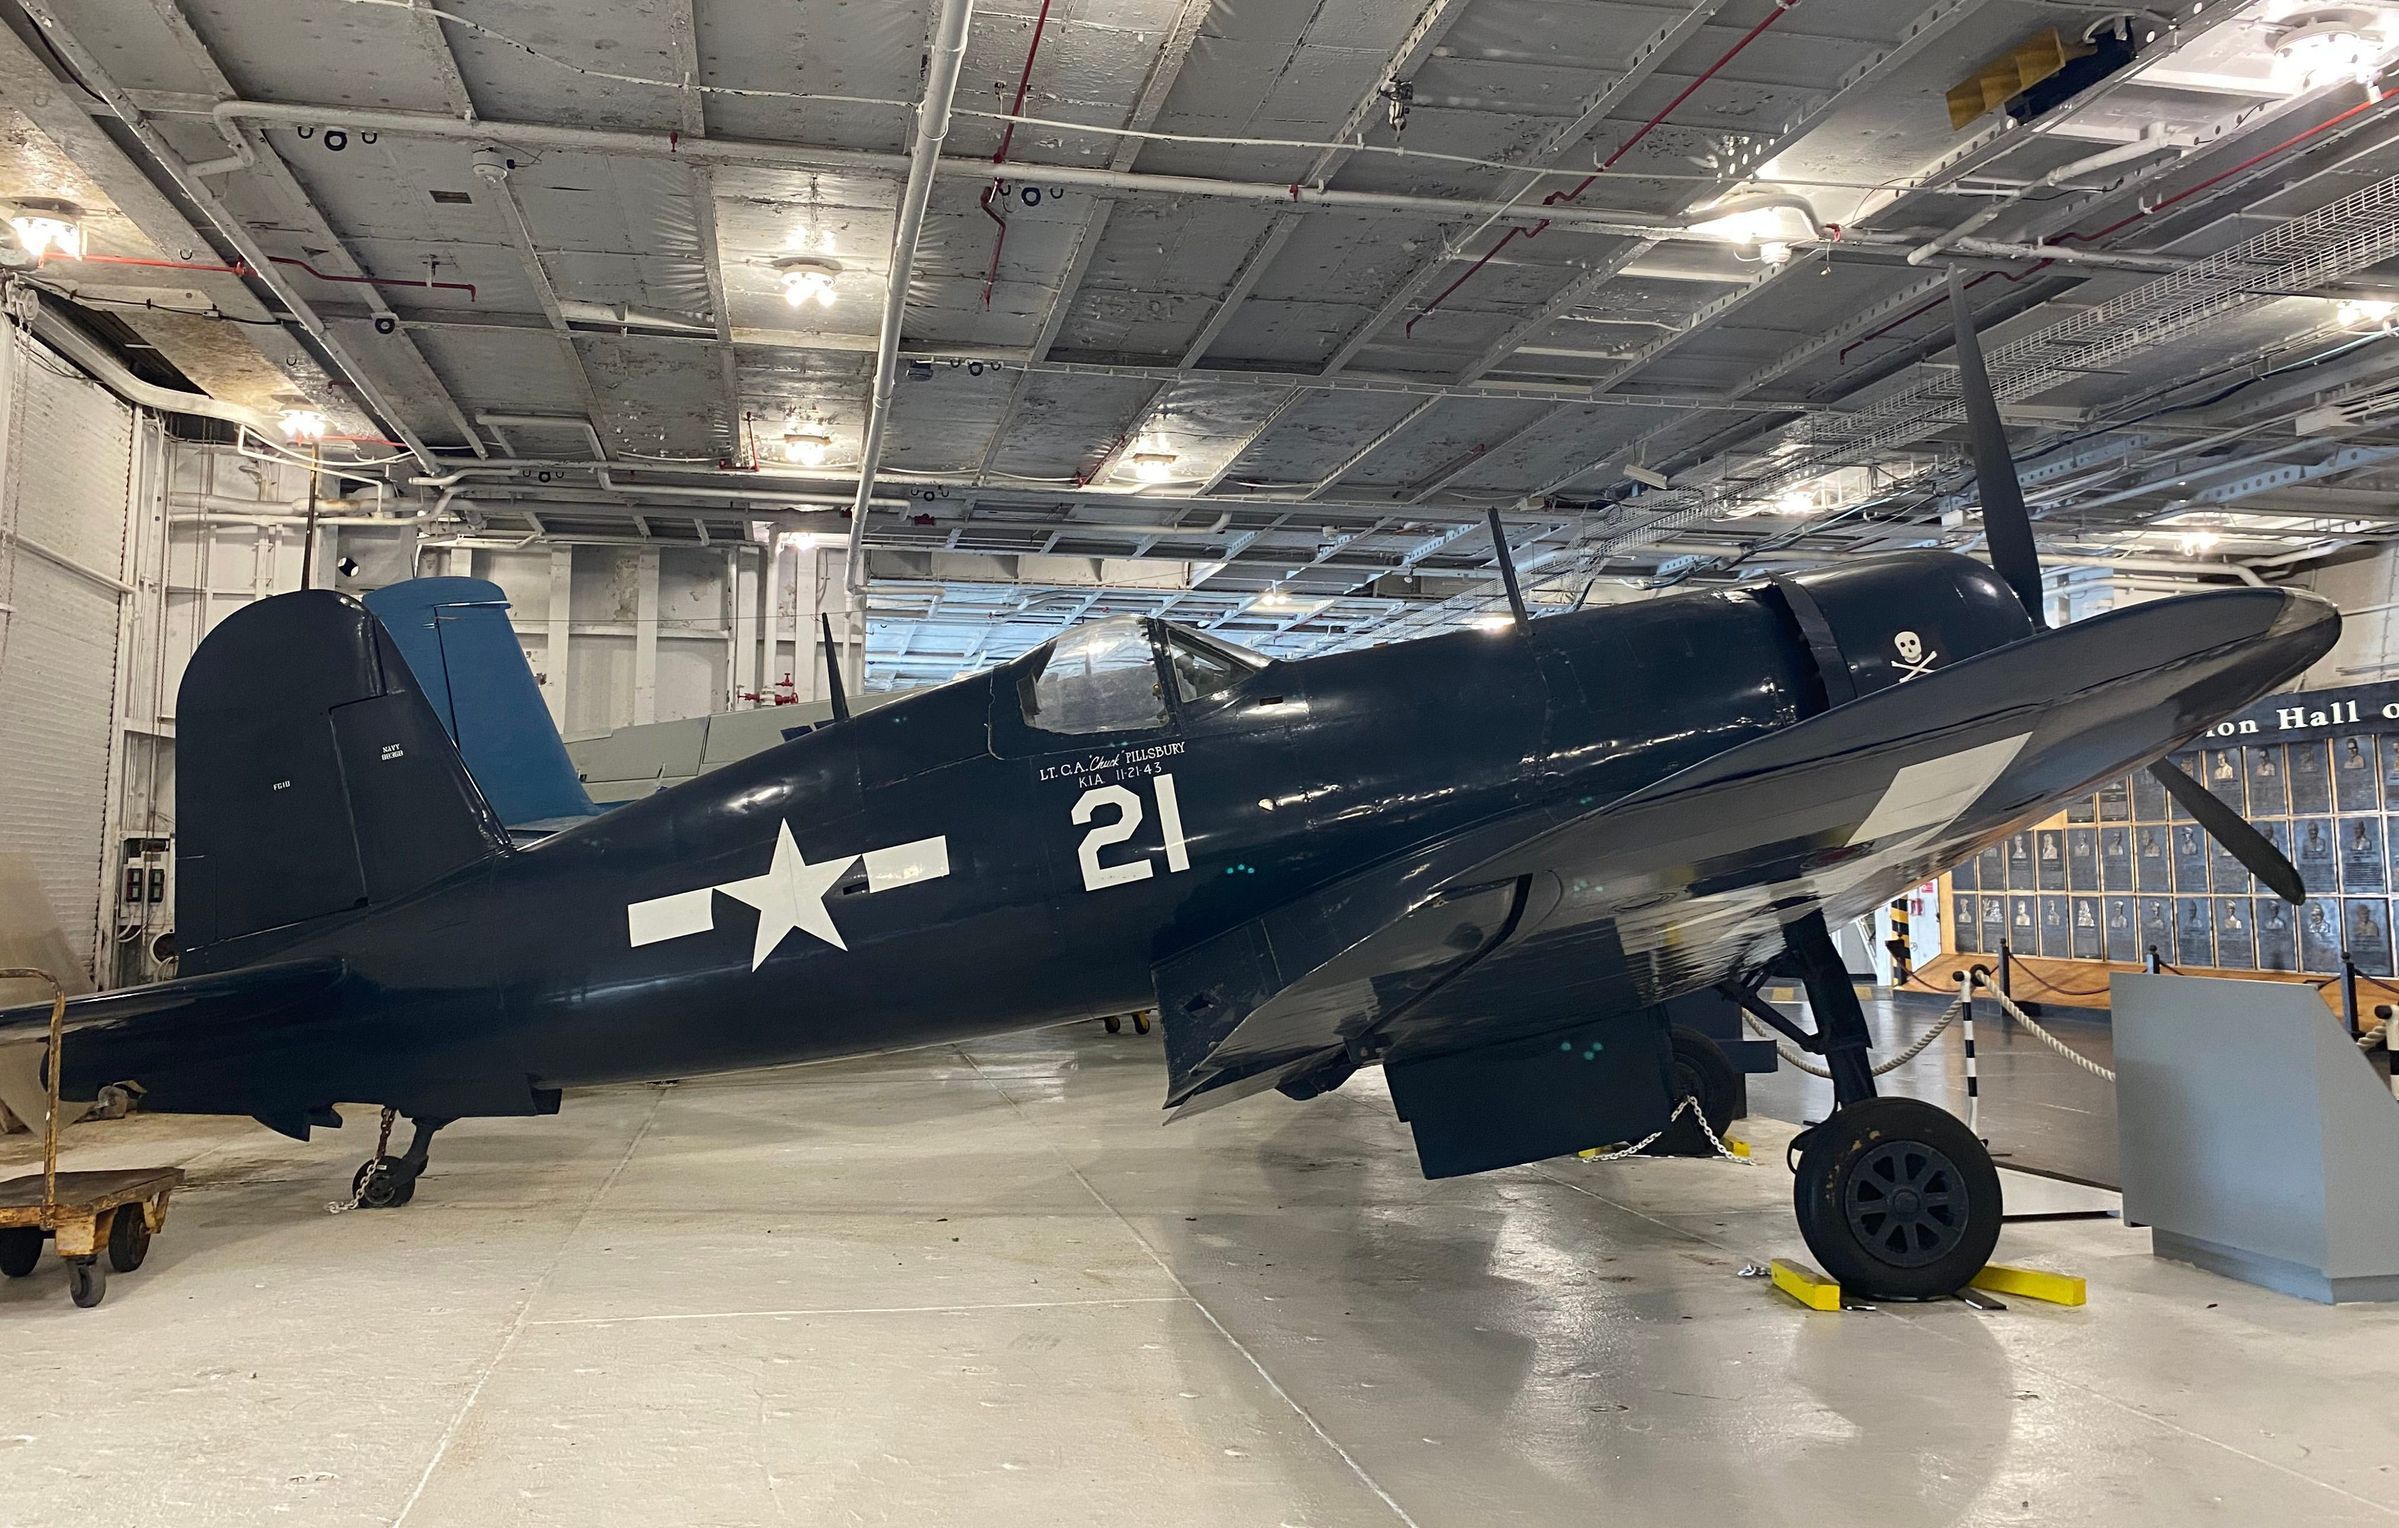 Primary Image of FG-1D Corsair